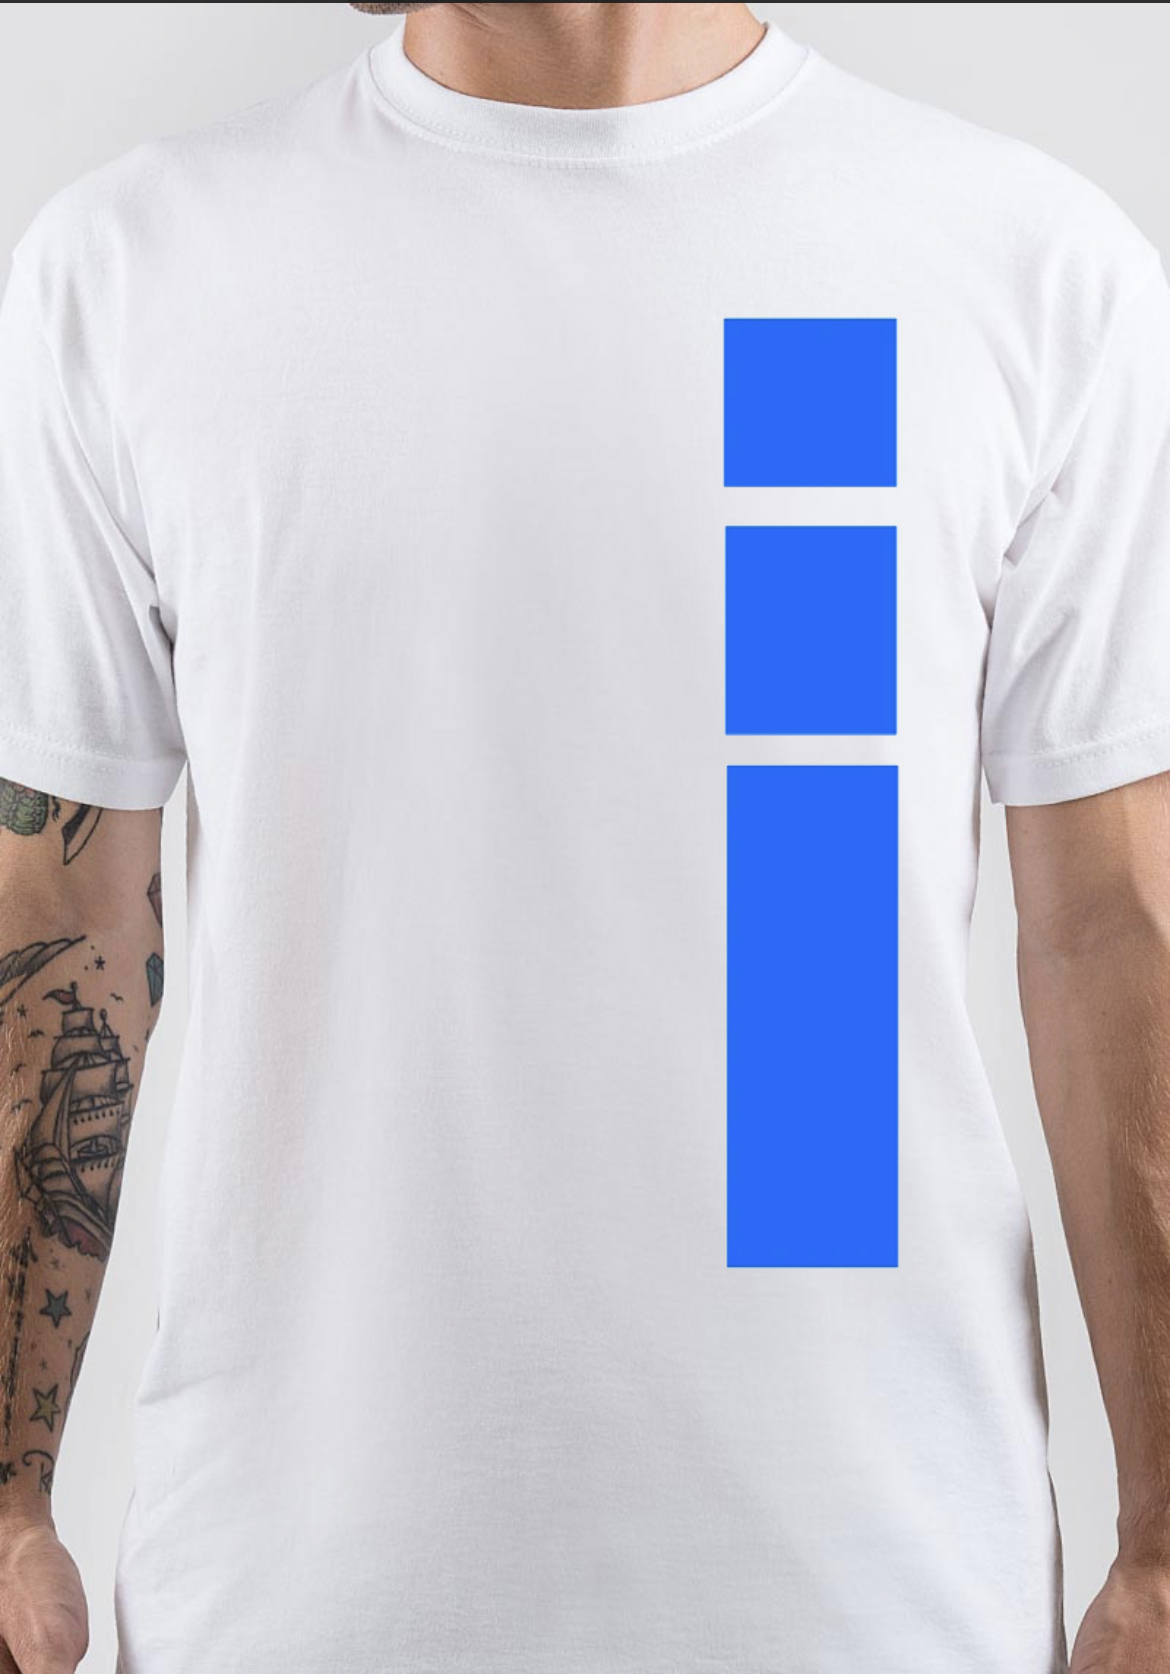 Blueface T-Shirt And Merchandise